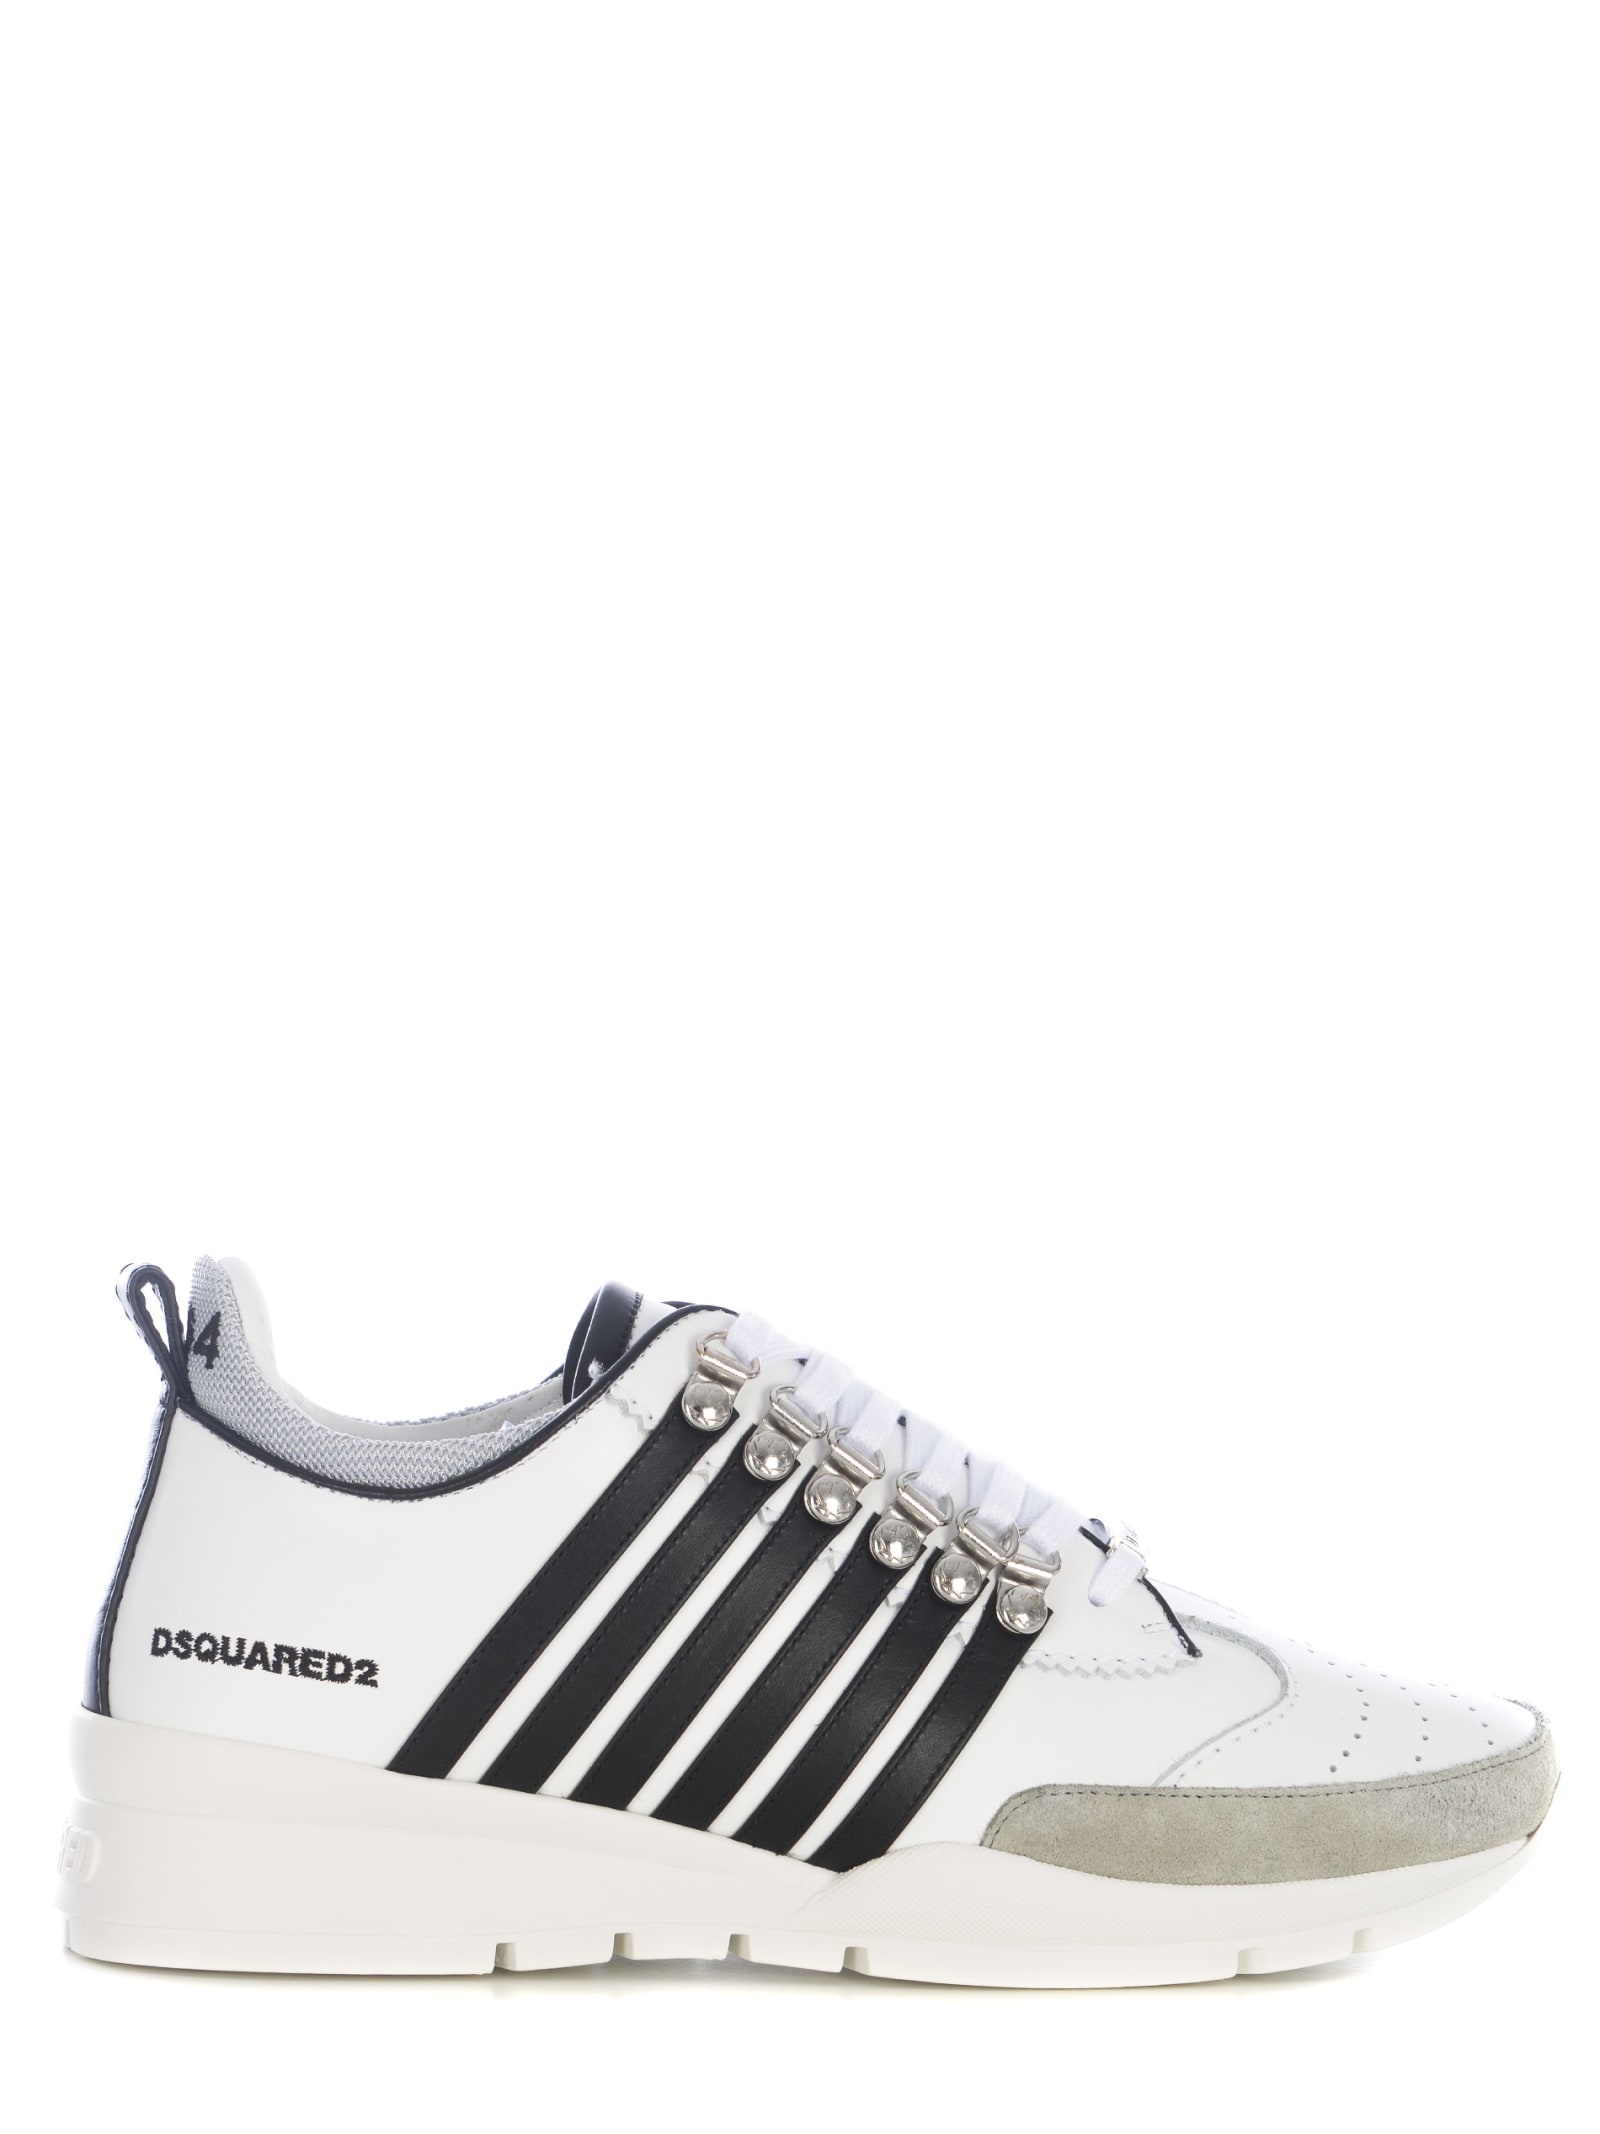 DSQUARED2 SNEAKERS DSQUARED2 LEGENDARY MADE OF LEATHER